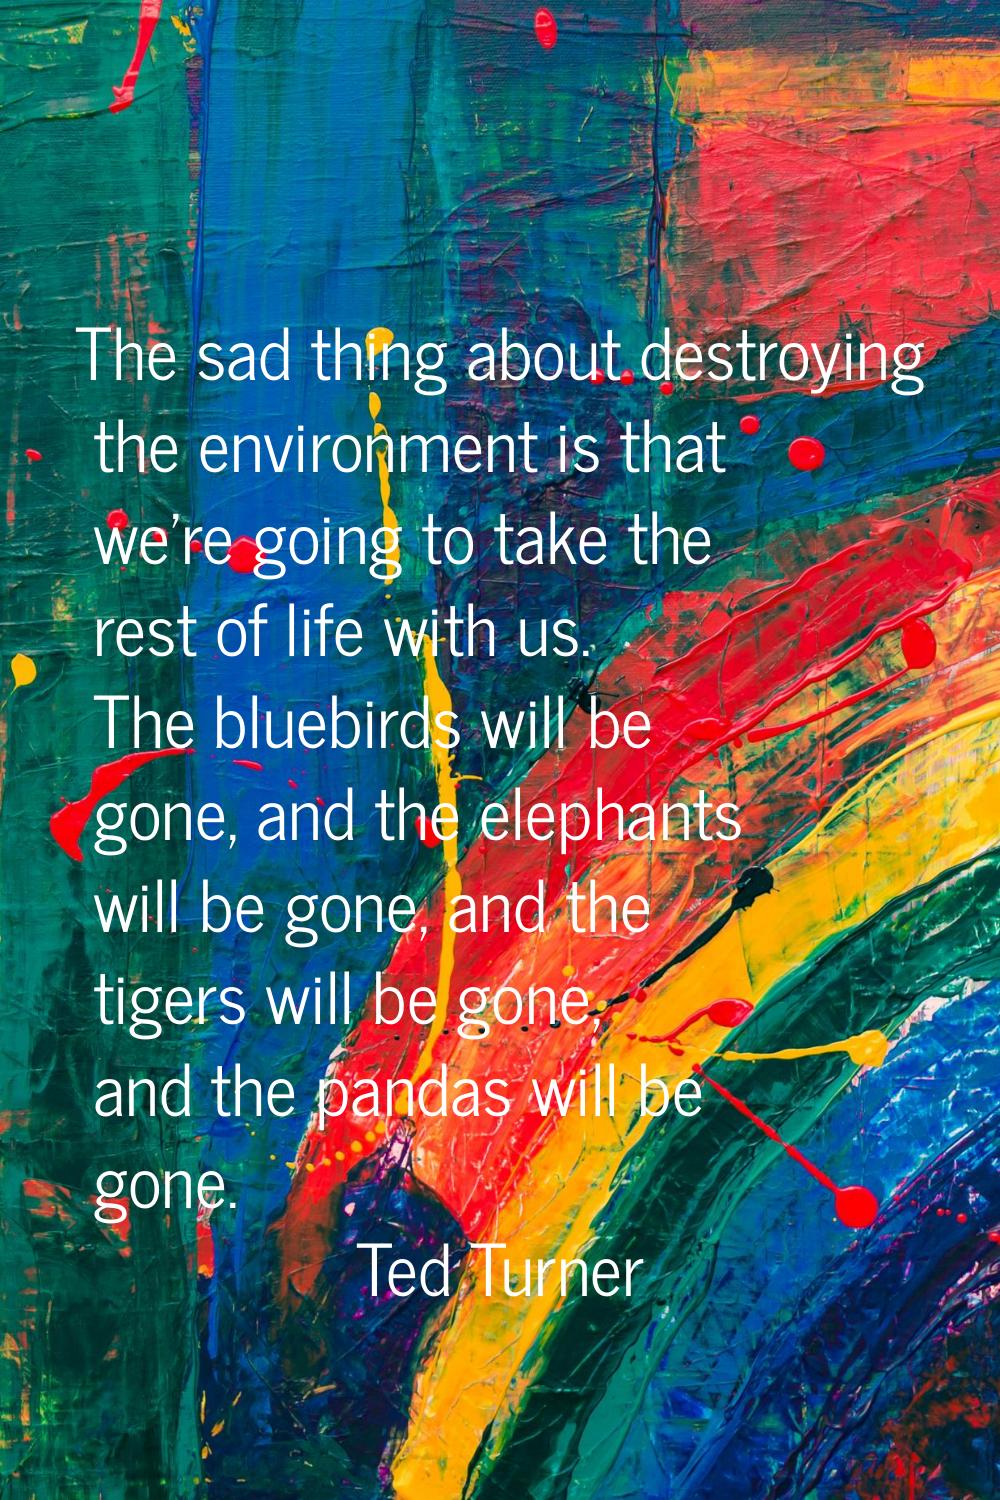 The sad thing about destroying the environment is that we're going to take the rest of life with us